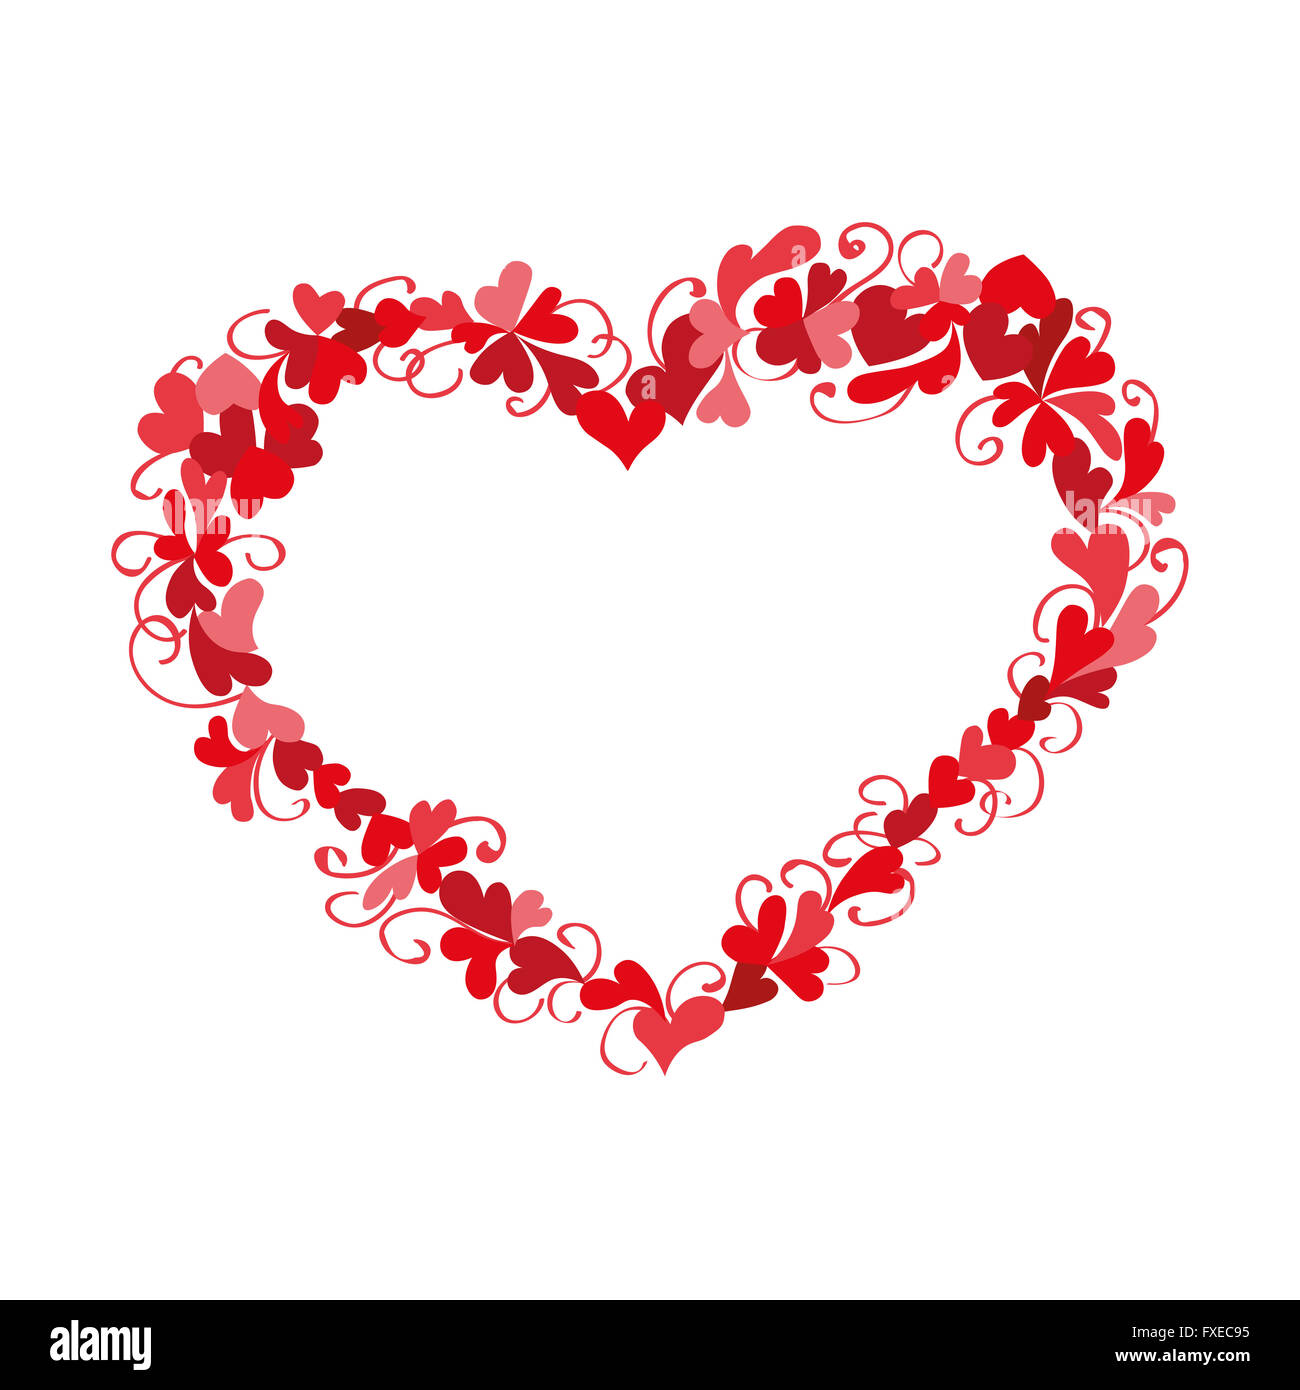 Valentines Day postcard Image in the shape of a hearts Stock Photo